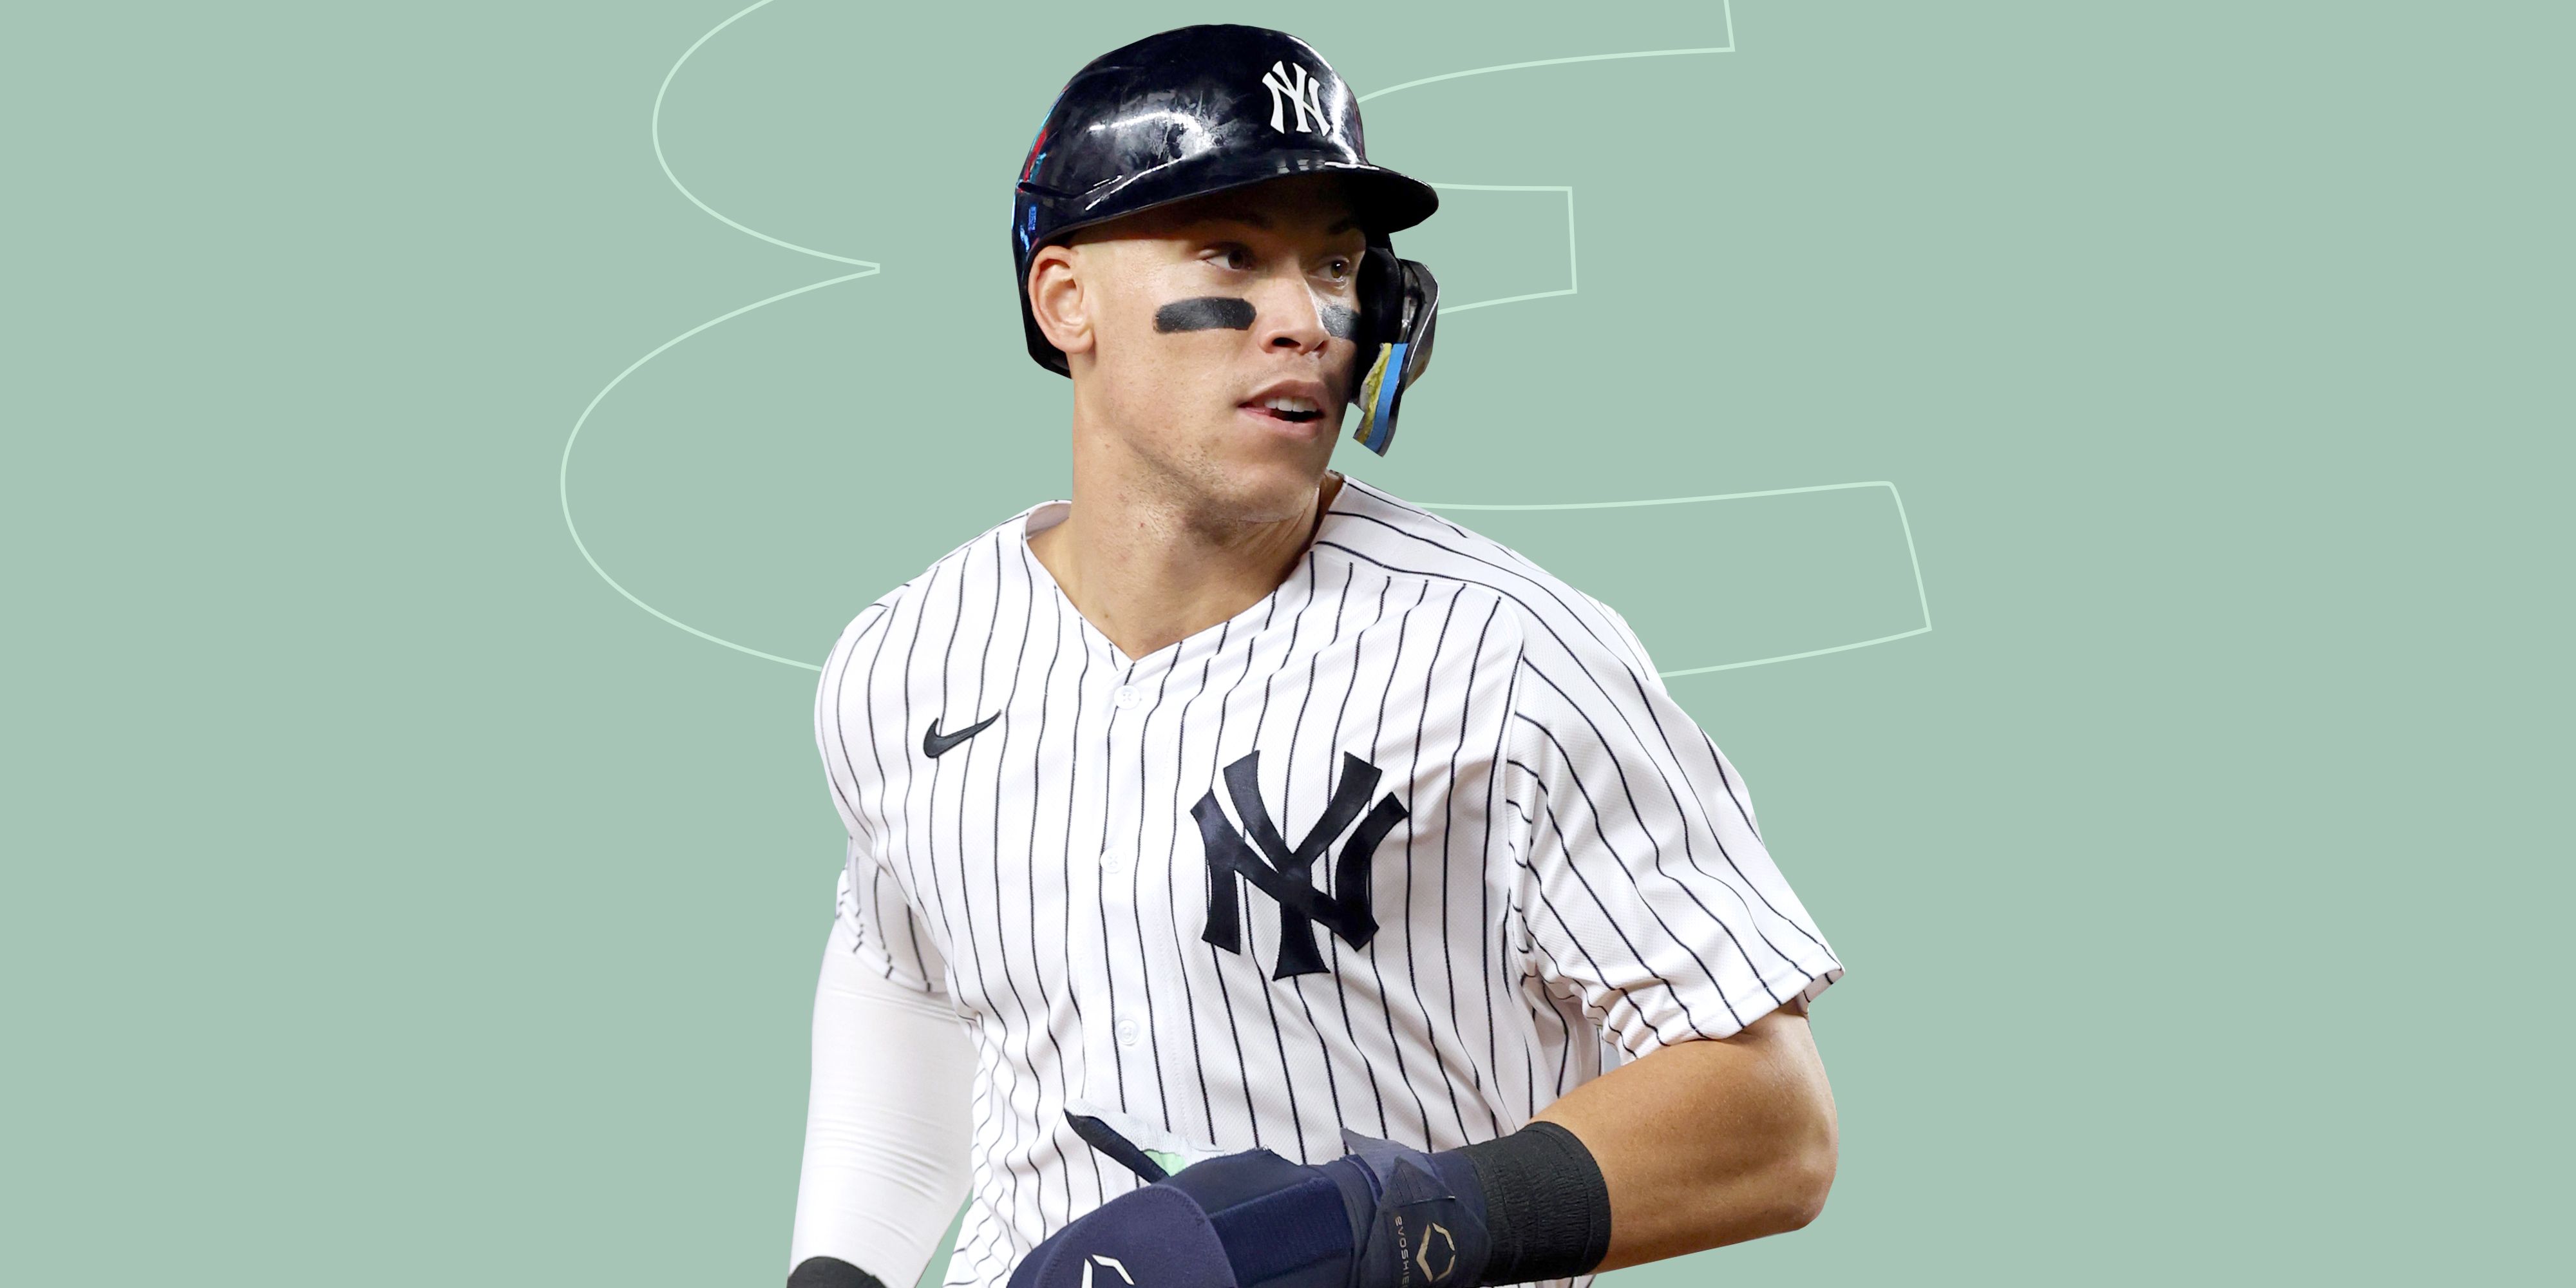 Replying to @brayden.greenn Aaron Judge Wallpaper! Who Should be next